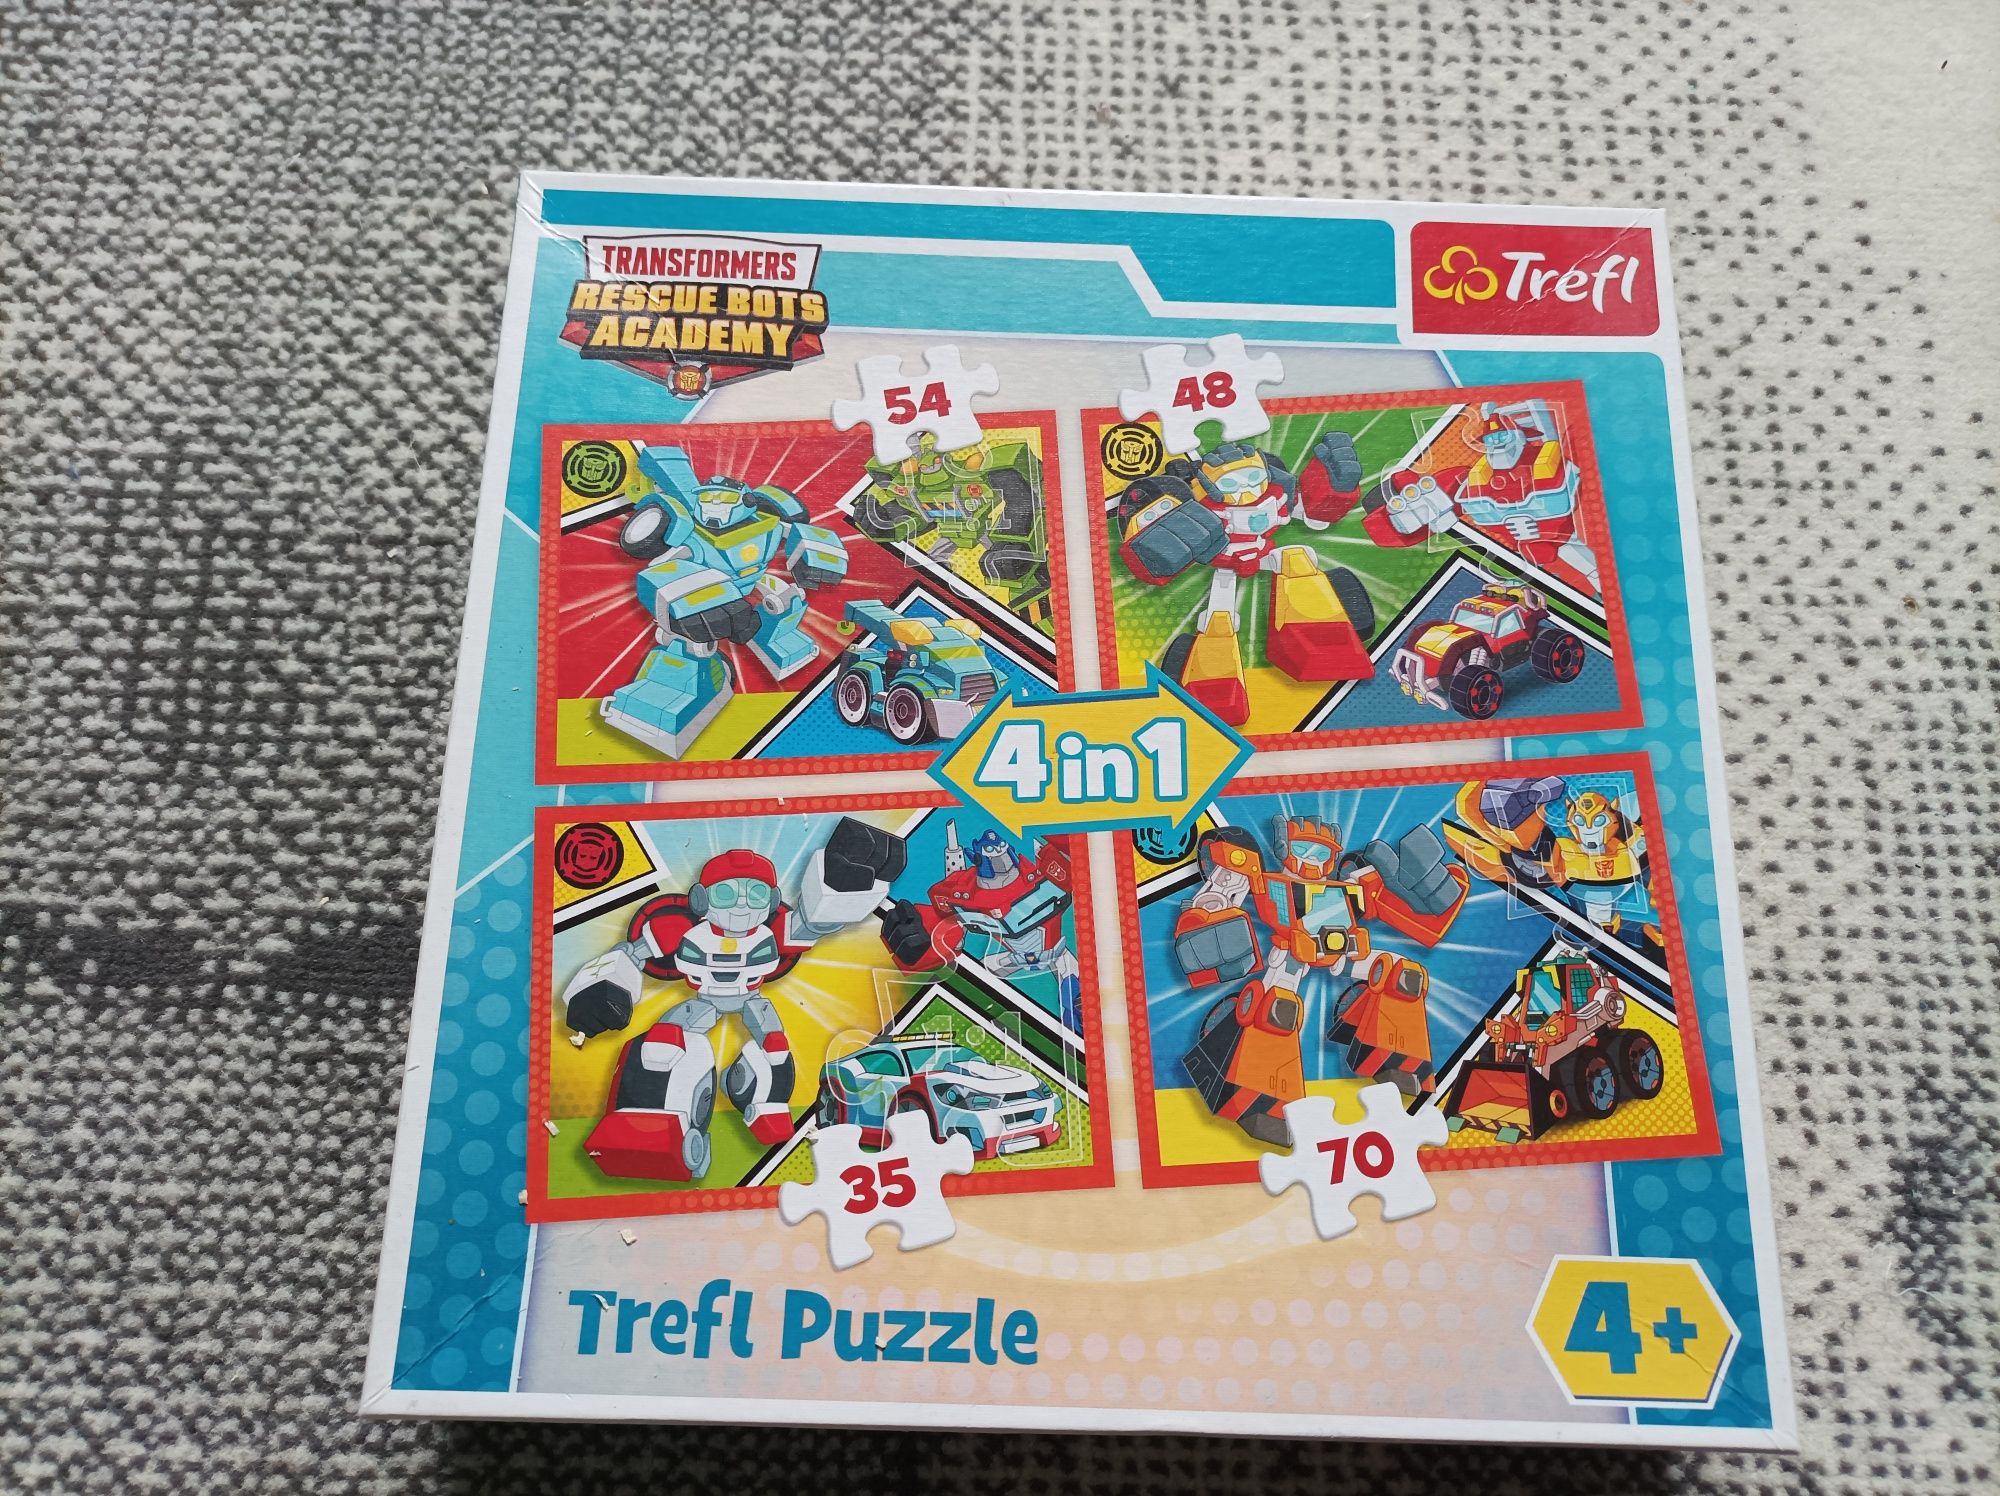 Puzzle Transformers rescue bots  academy +4